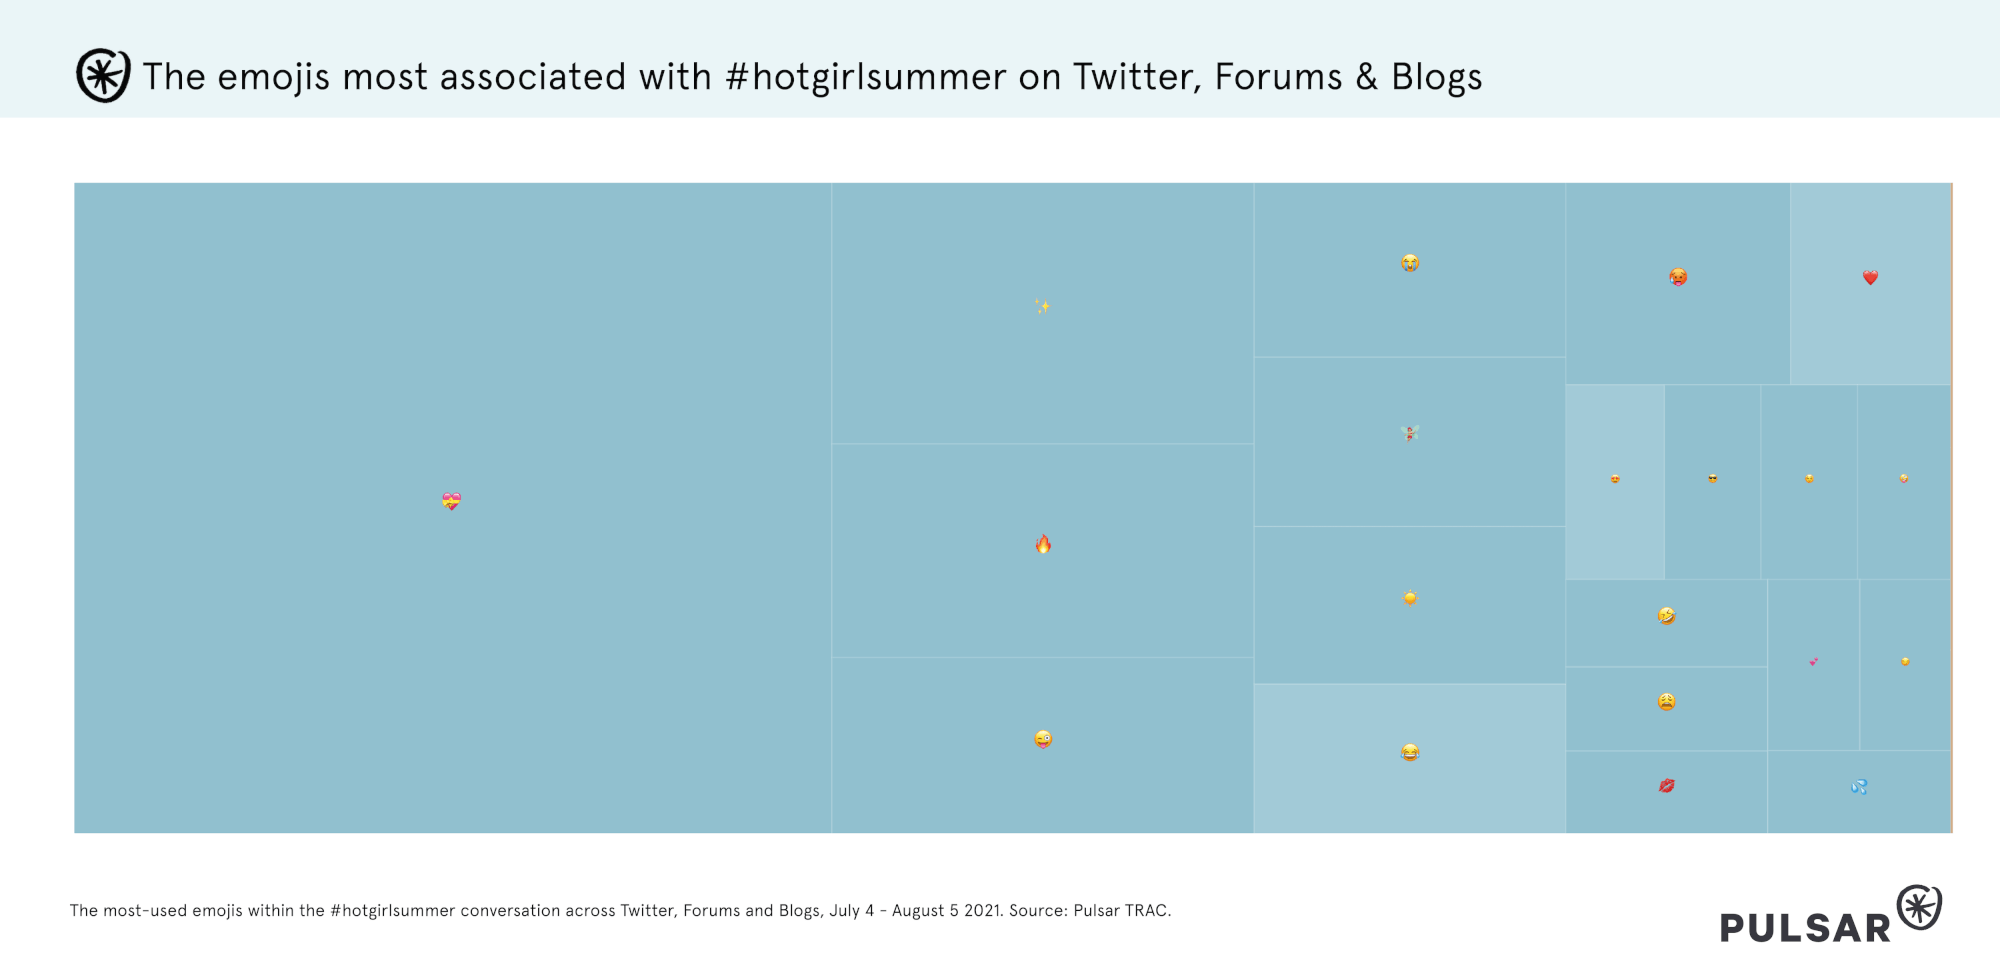 The emojis most associated with #hotgirlsummer on Twitter